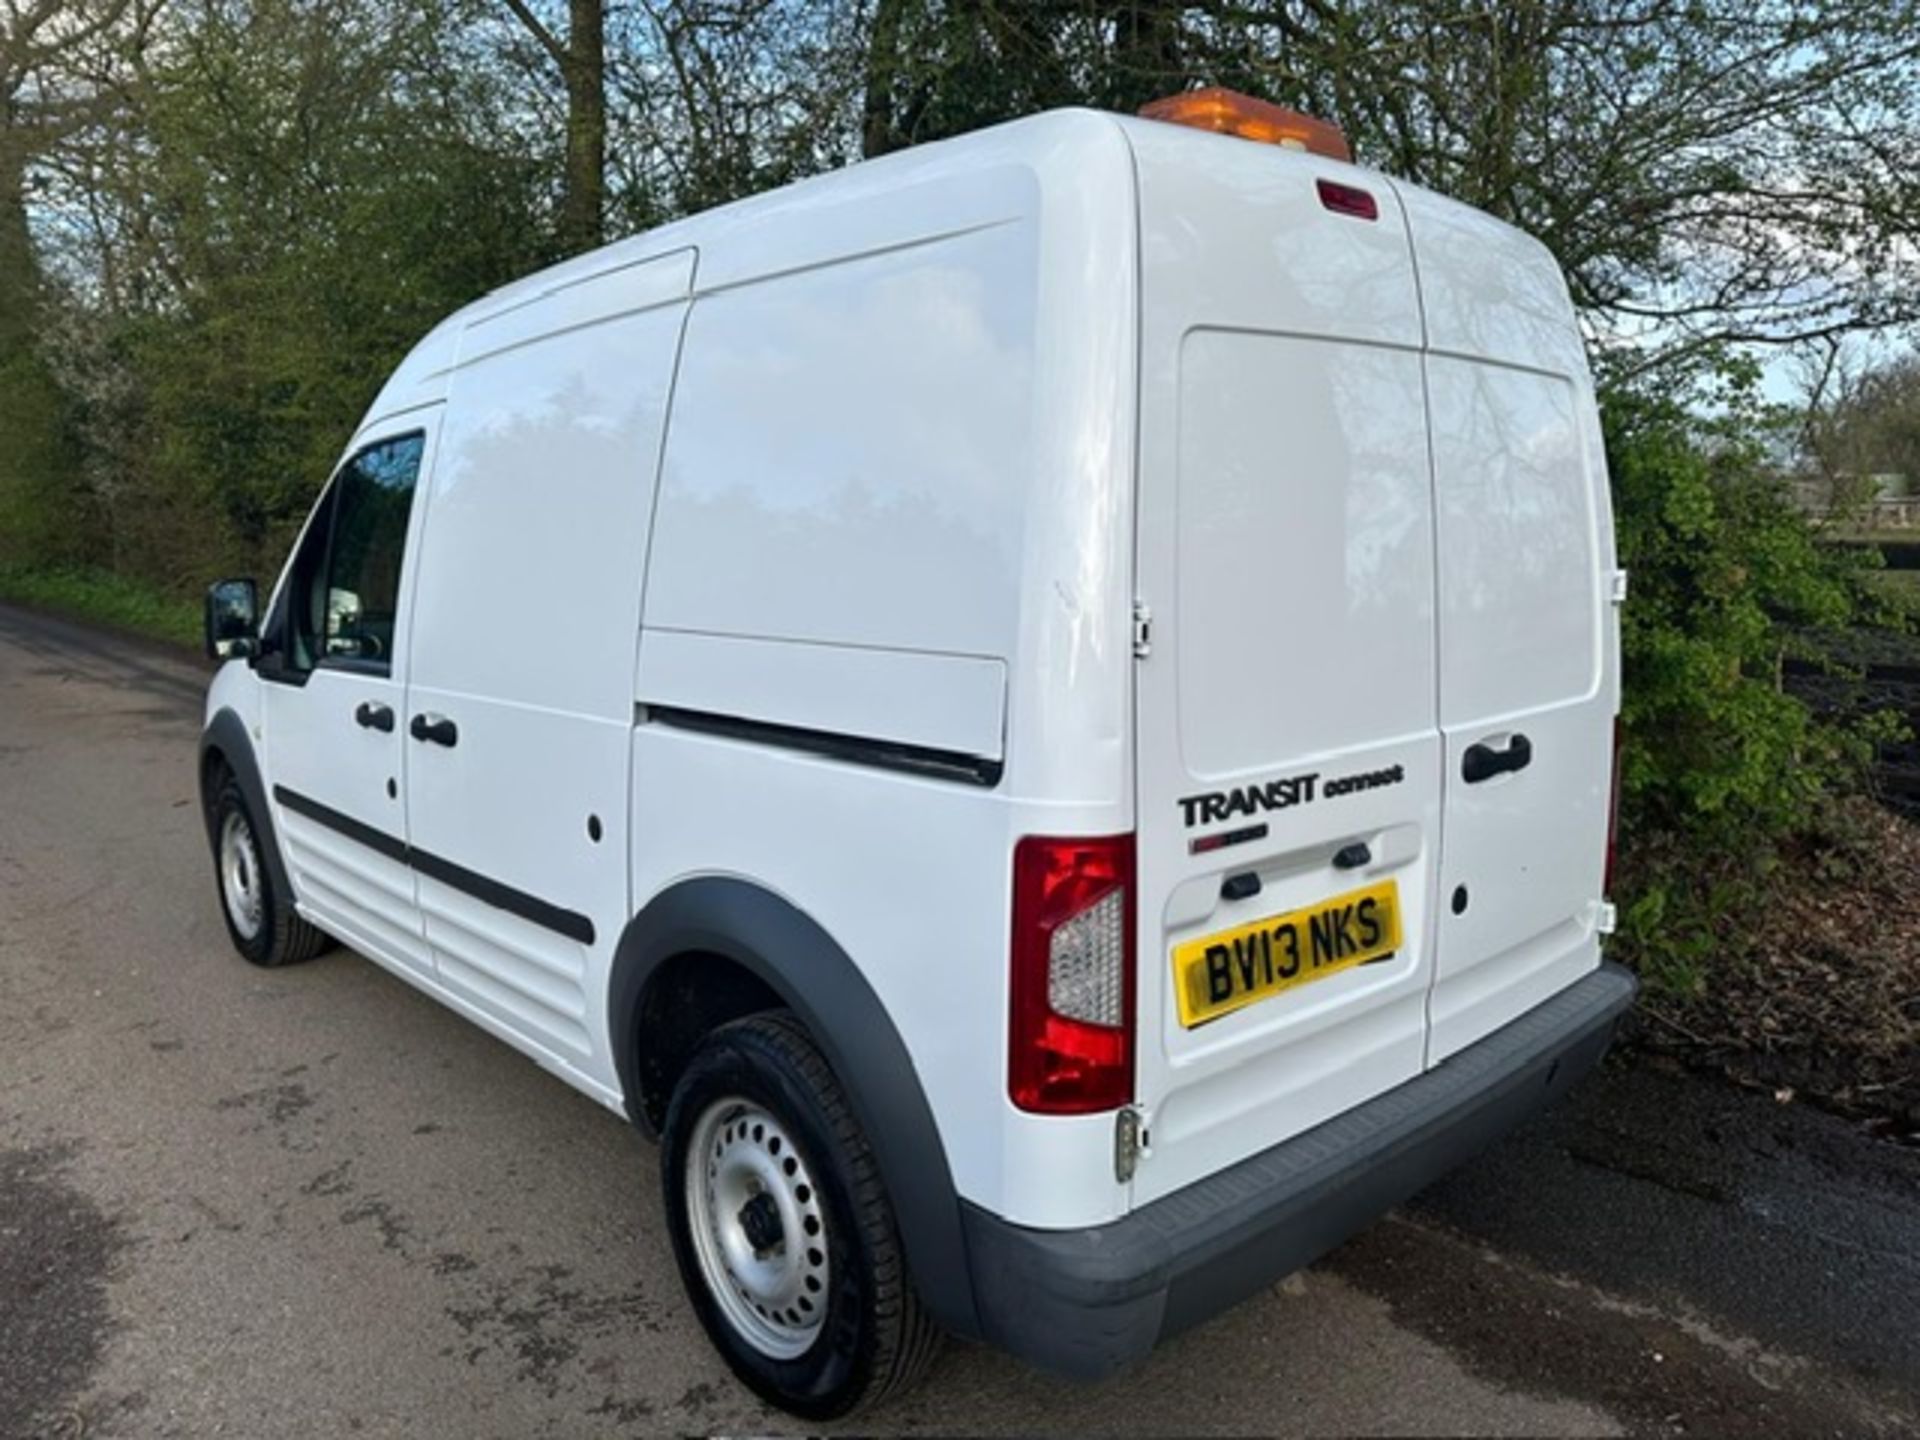 FORD TRANSIT CONNECT PANEL VAN REG:BV13 NKS 1.8LITRE. HIGH ROOF LWB. 83K REC MILES APPROX. WITH V5 A - Image 7 of 26